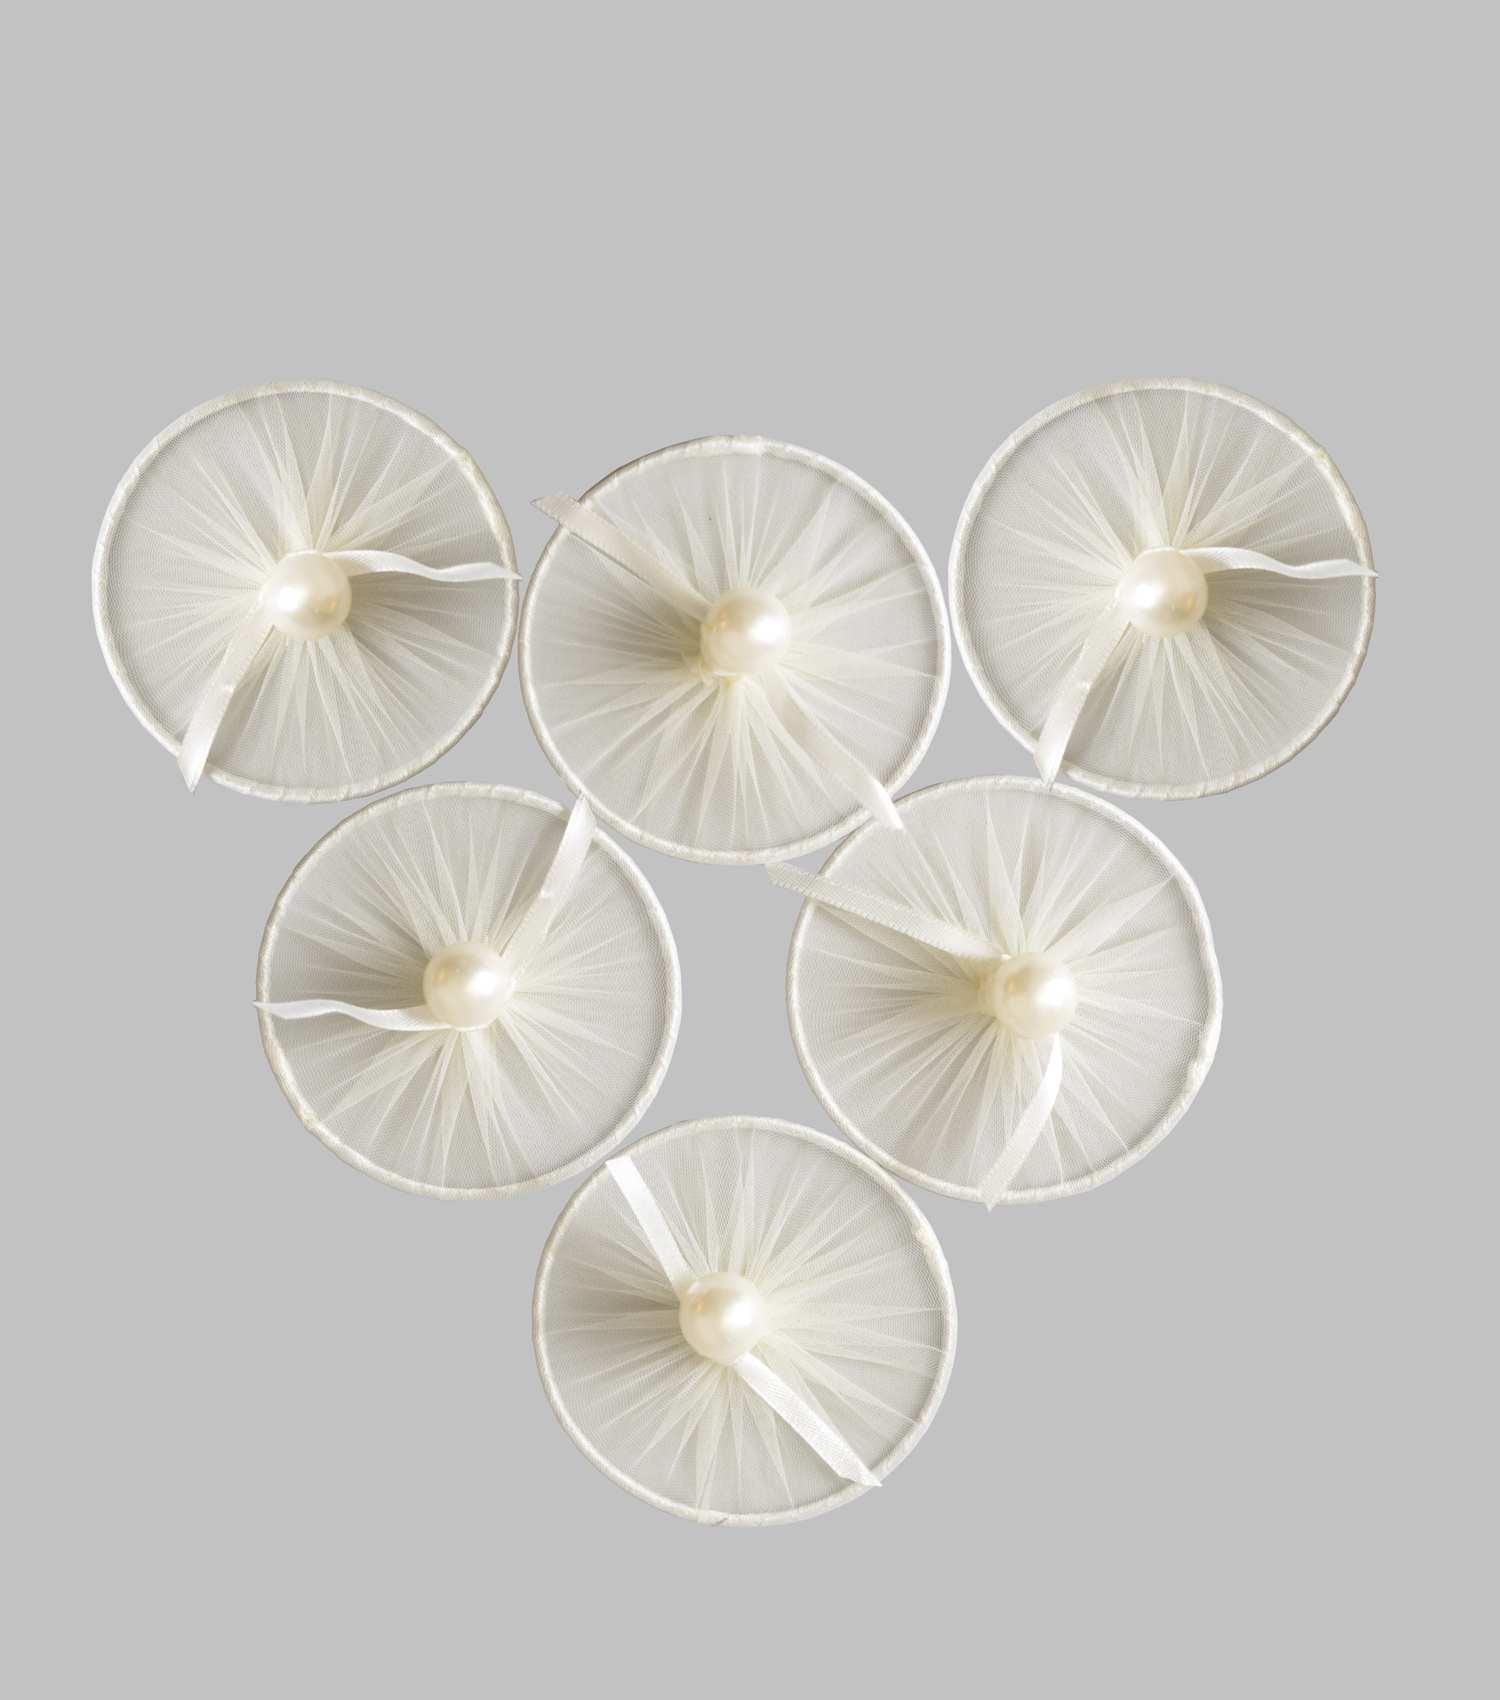 Auric glass covers with pearl beads - set of 6